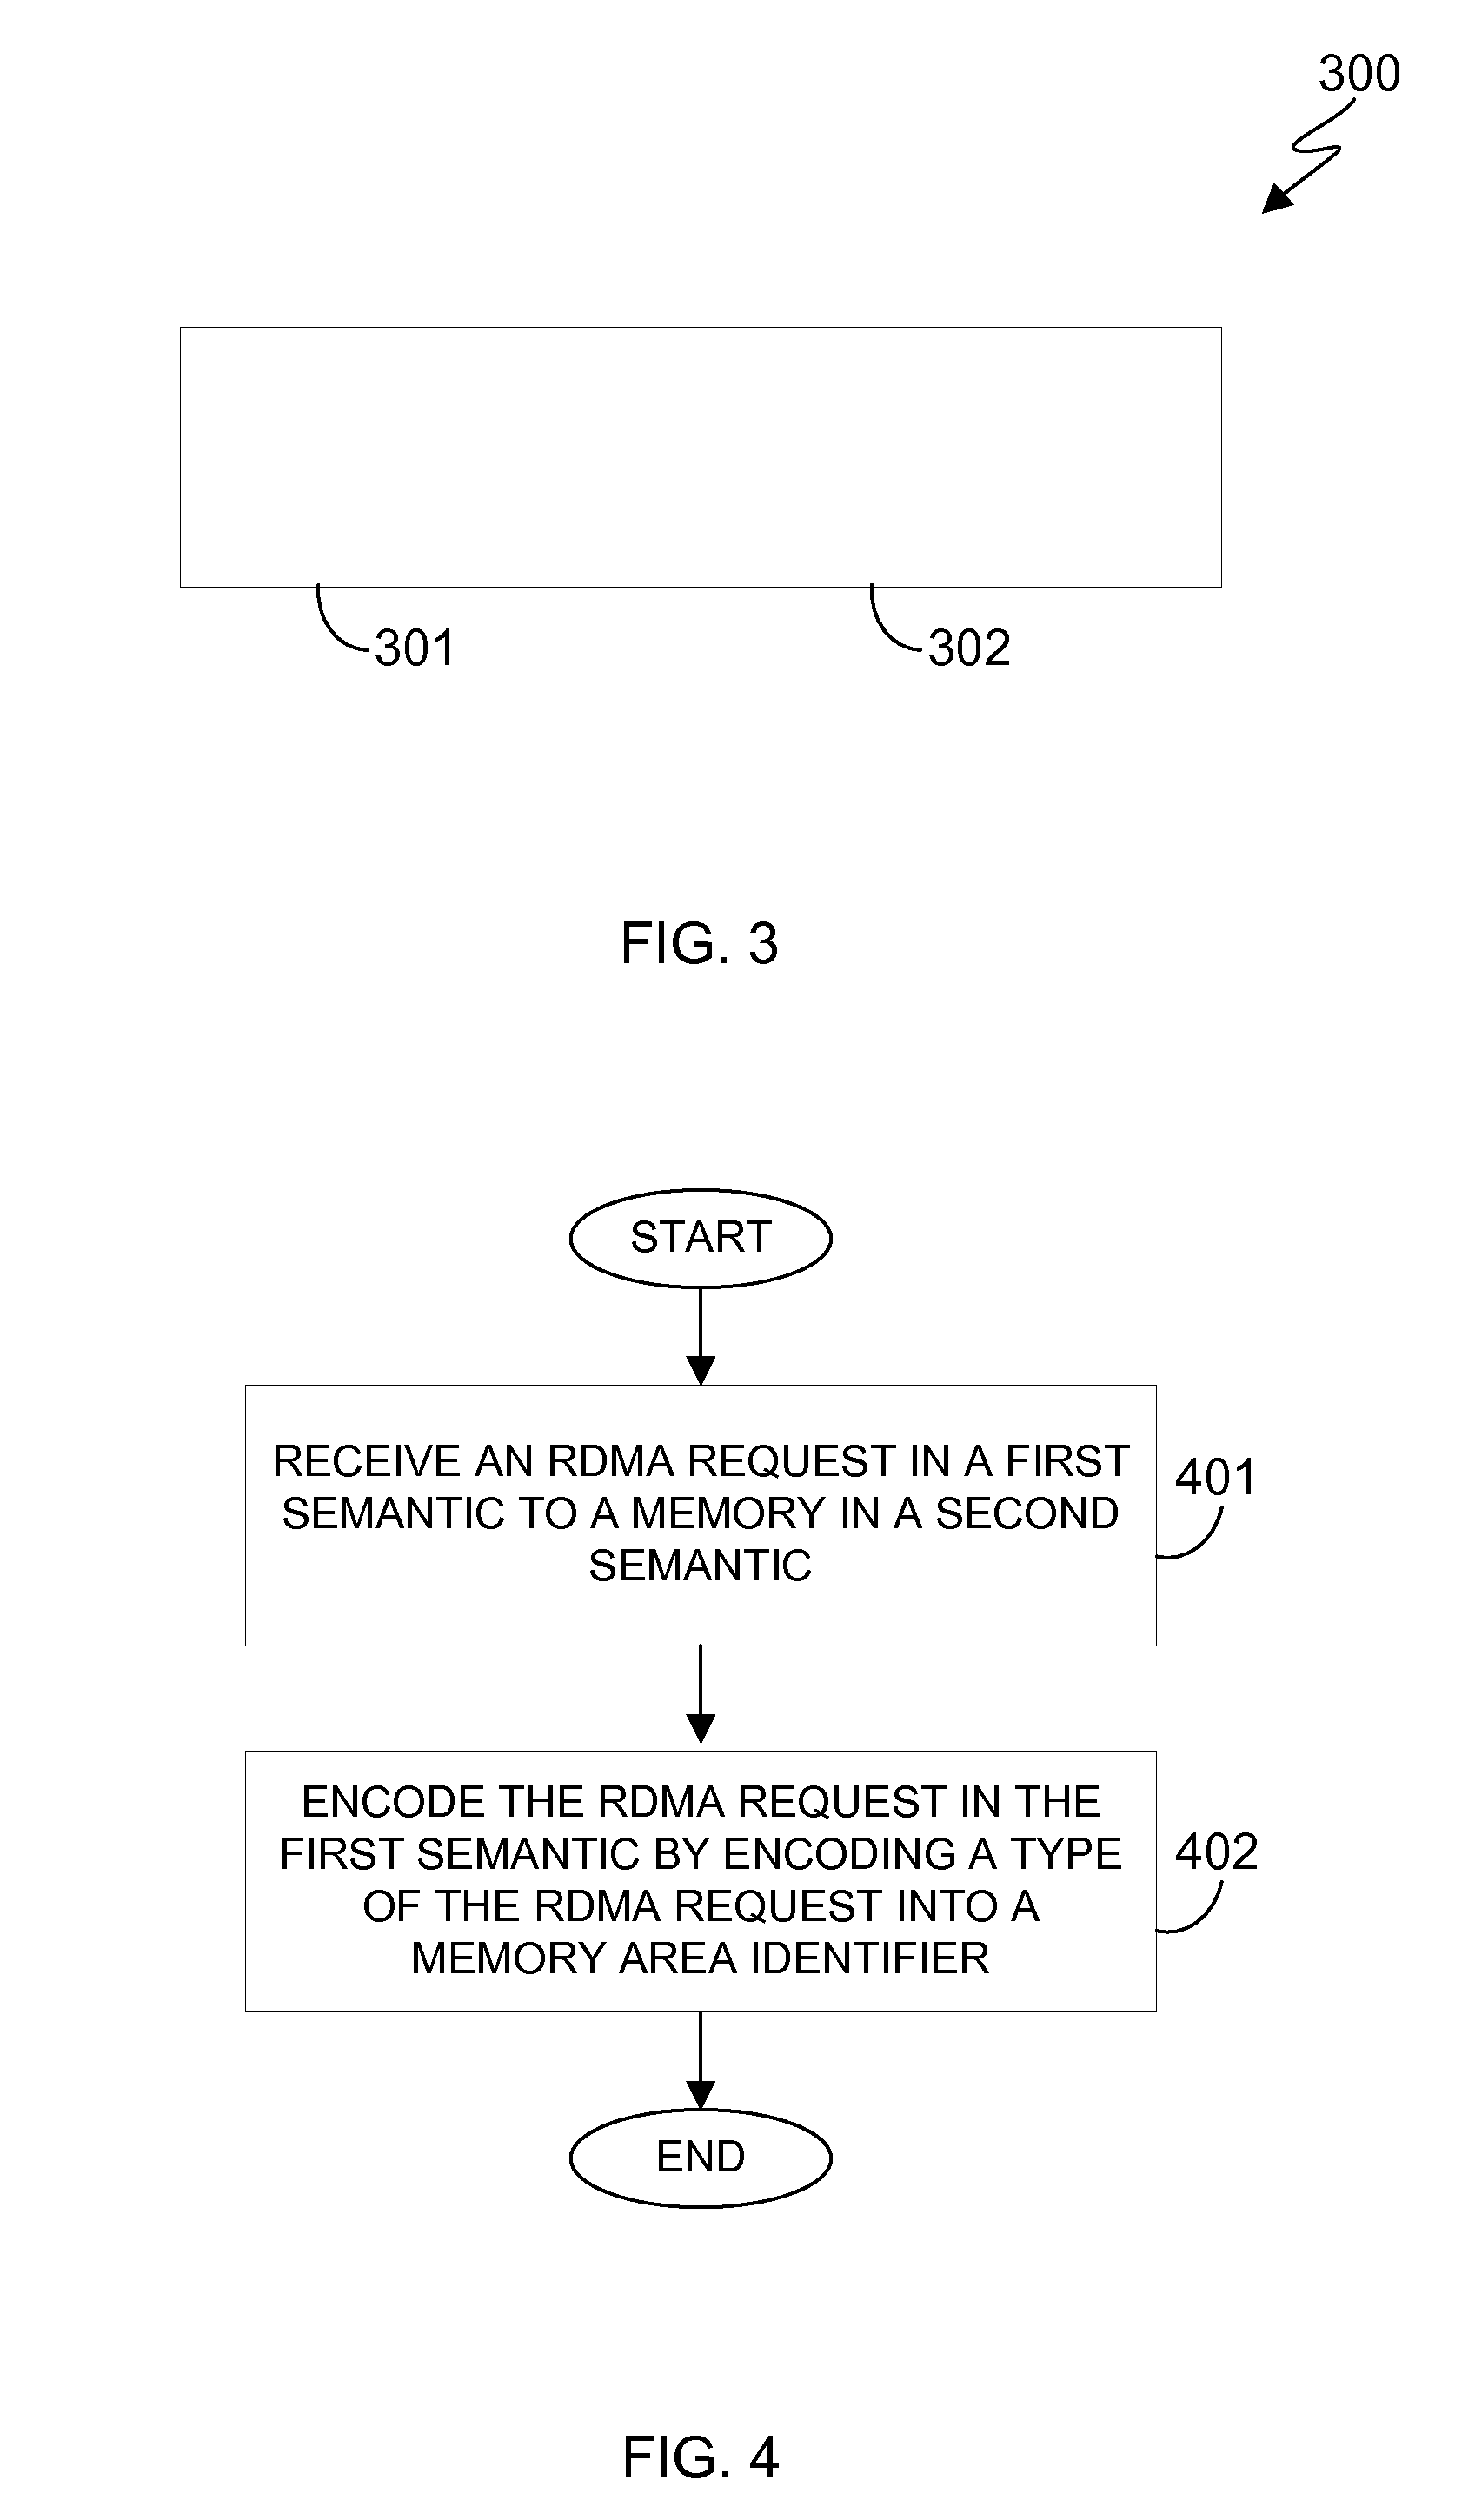 Extending remote direct memory access operations for storage class memory access